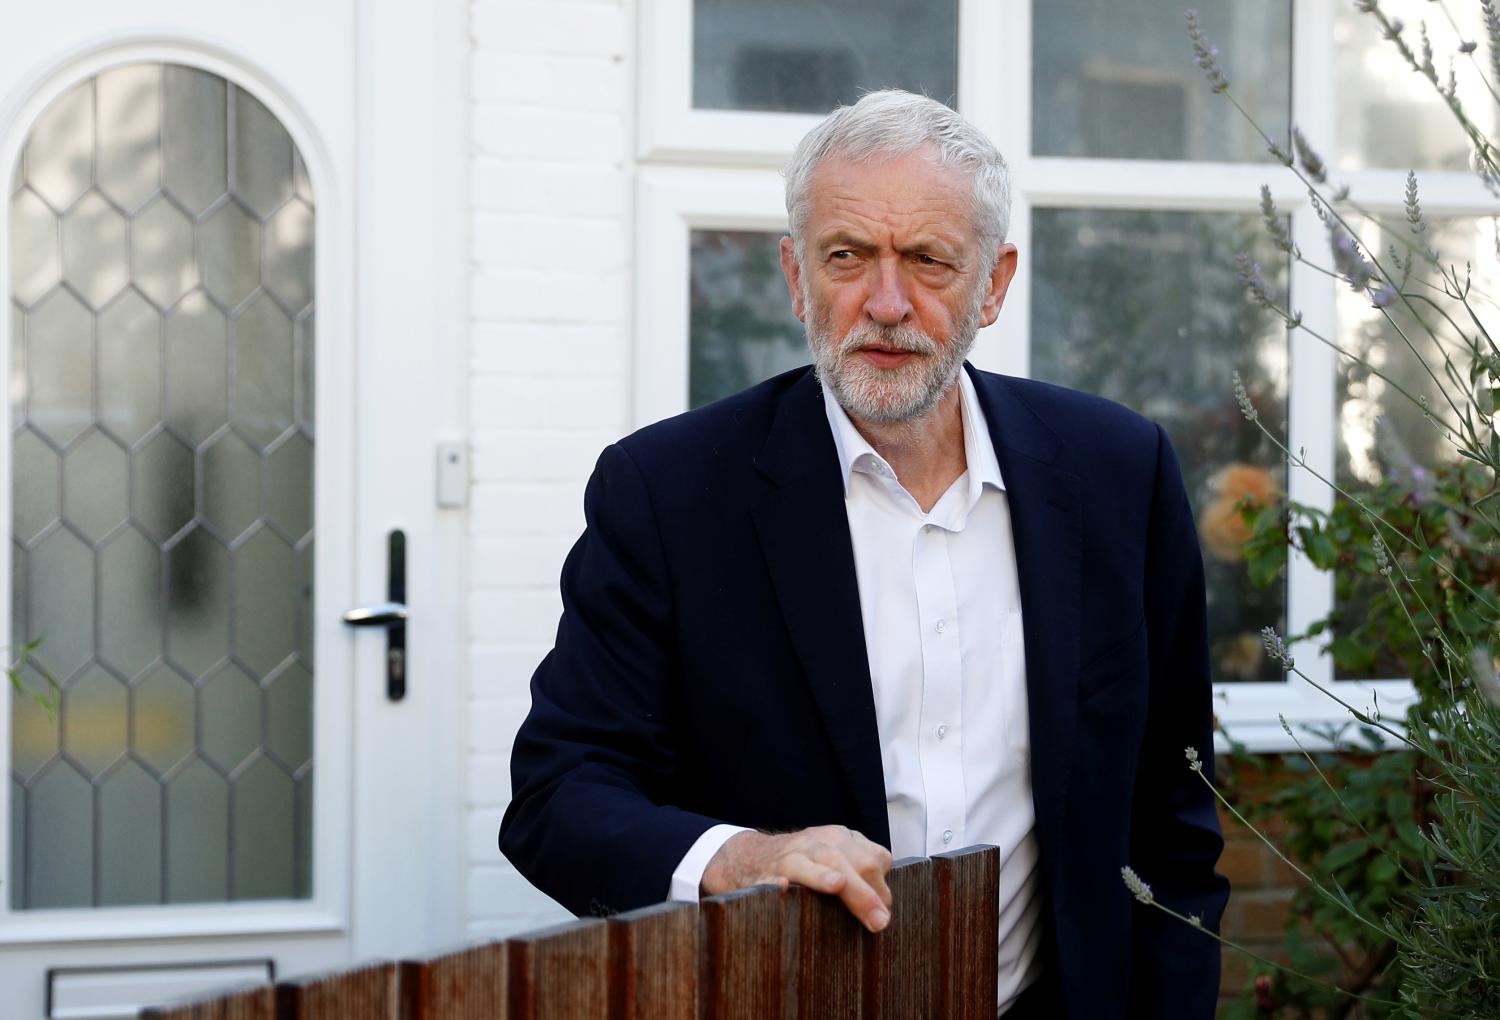 Britain's opposition Labour Party leader Jeremy Corbyn leaves his home in London, Britain July 3, 2019. REUTERS/Peter Nicholls - RC1DF34067A0